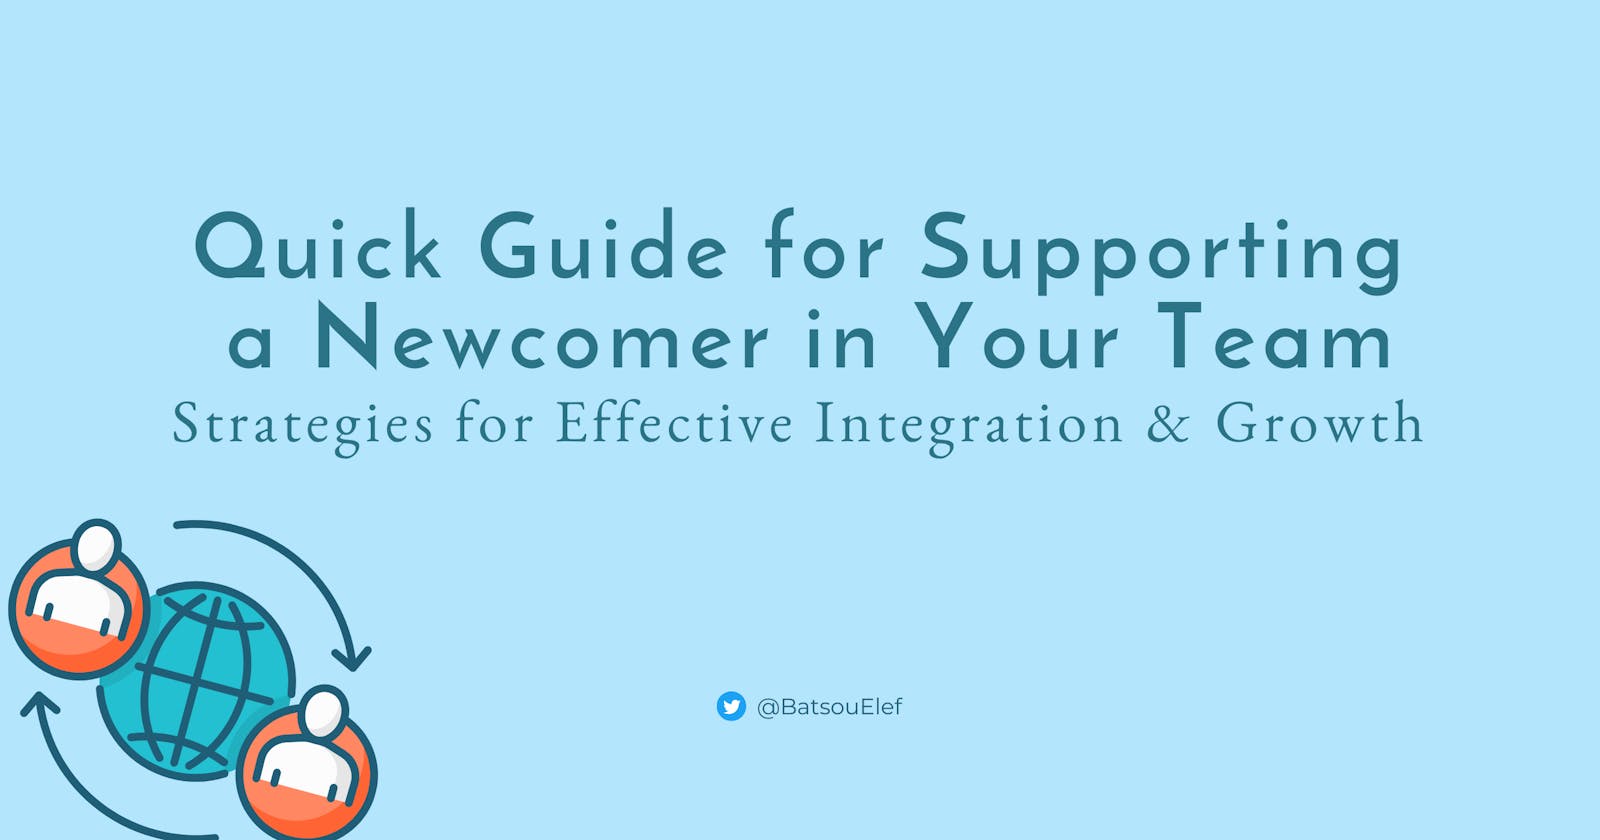 Quick Guide for Supporting a Newcomer in Your Team